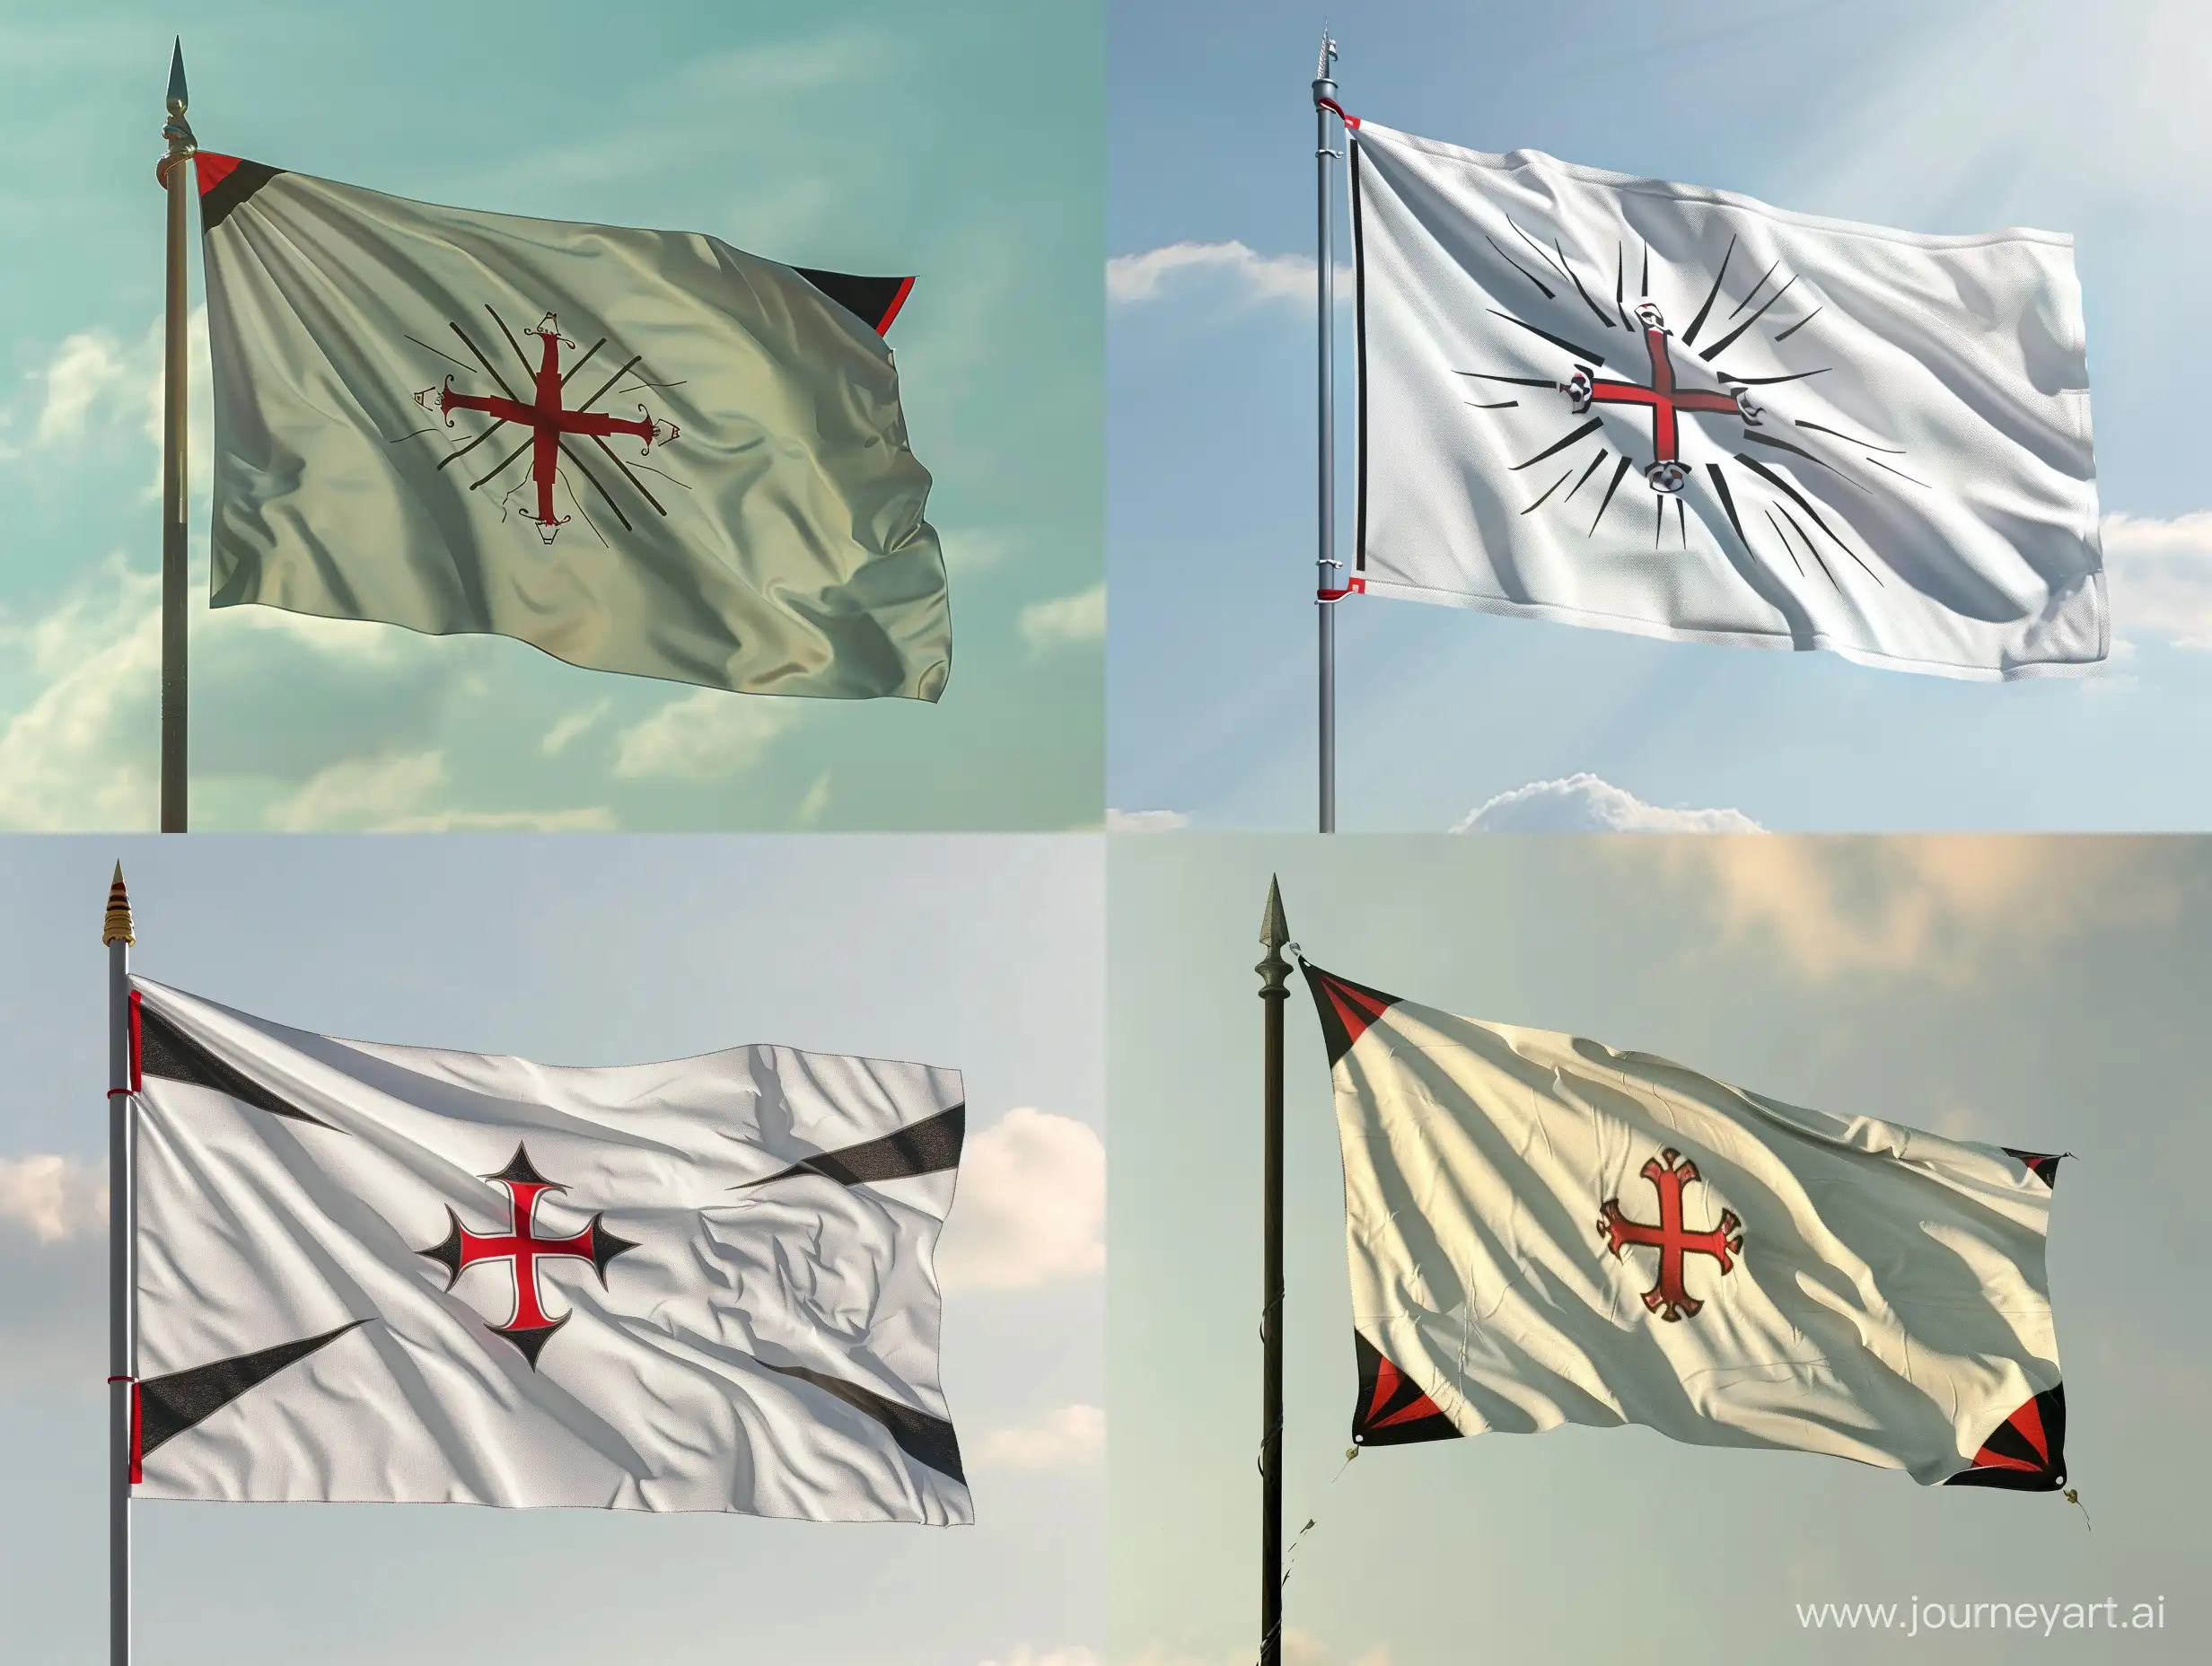 Order-of-the-Great-Light-Flag-with-Red-Cross-Symbol-and-White-Rays